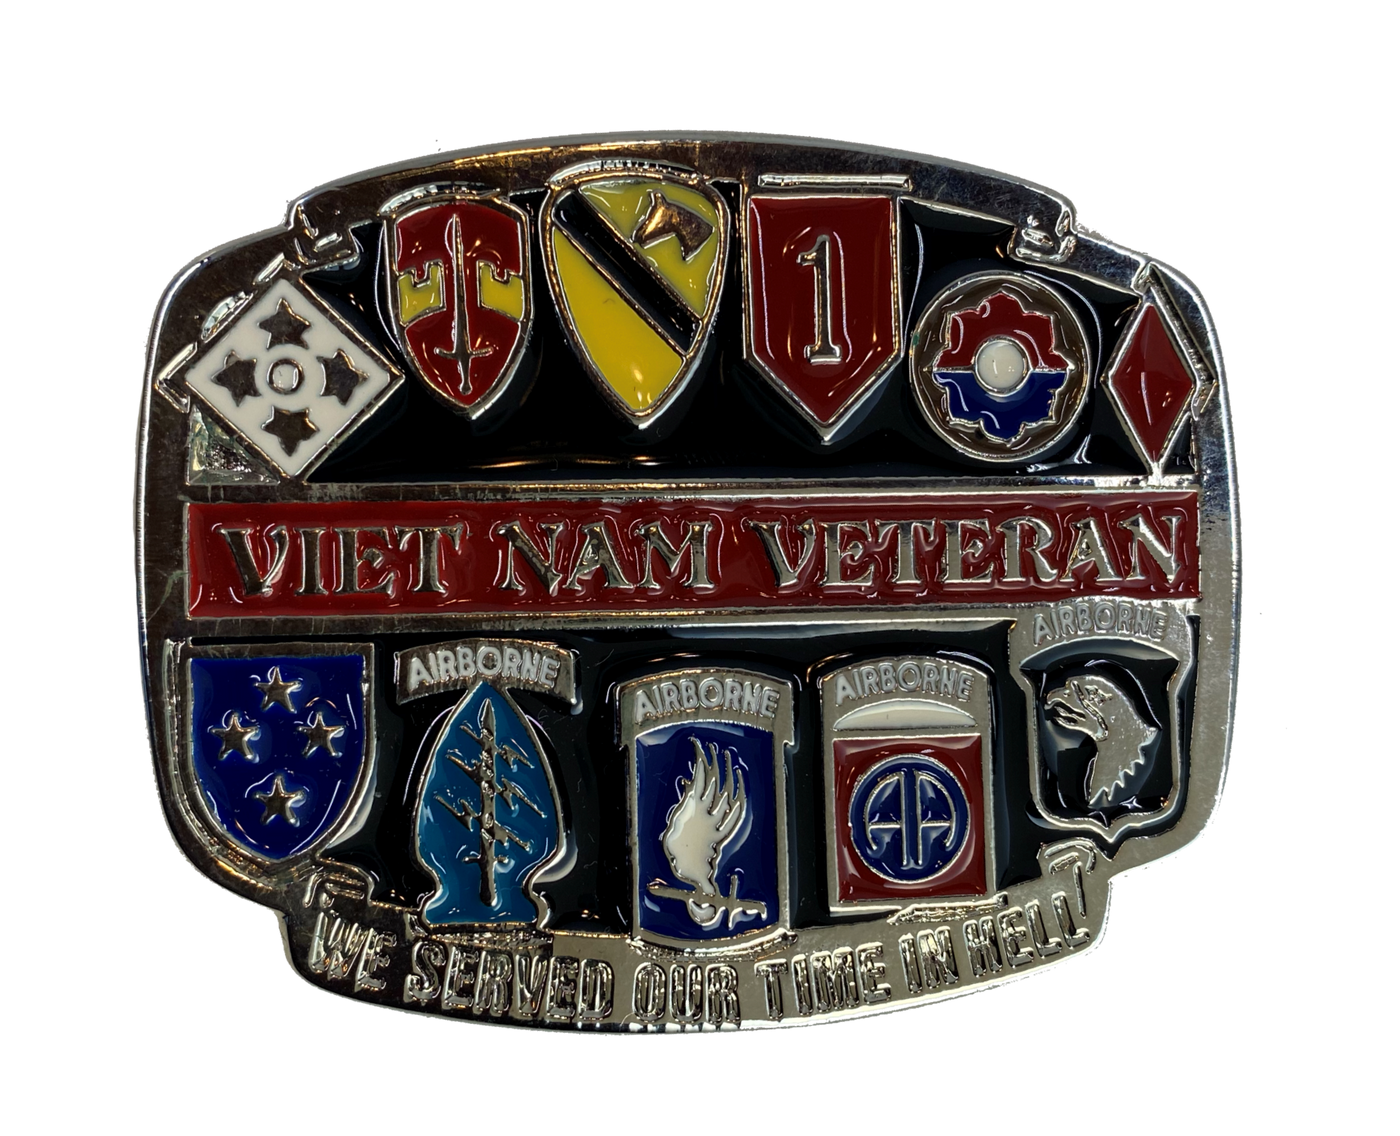 Very Unique Viet Nam Belt Buckle with specific unit emblems. Made from pewter with enameled colors of each unit. Great as a gift or for yourself. Fits up 1 /2" belts. Sold online or in our shop in Smyrna, TN, just outside of Nashville.